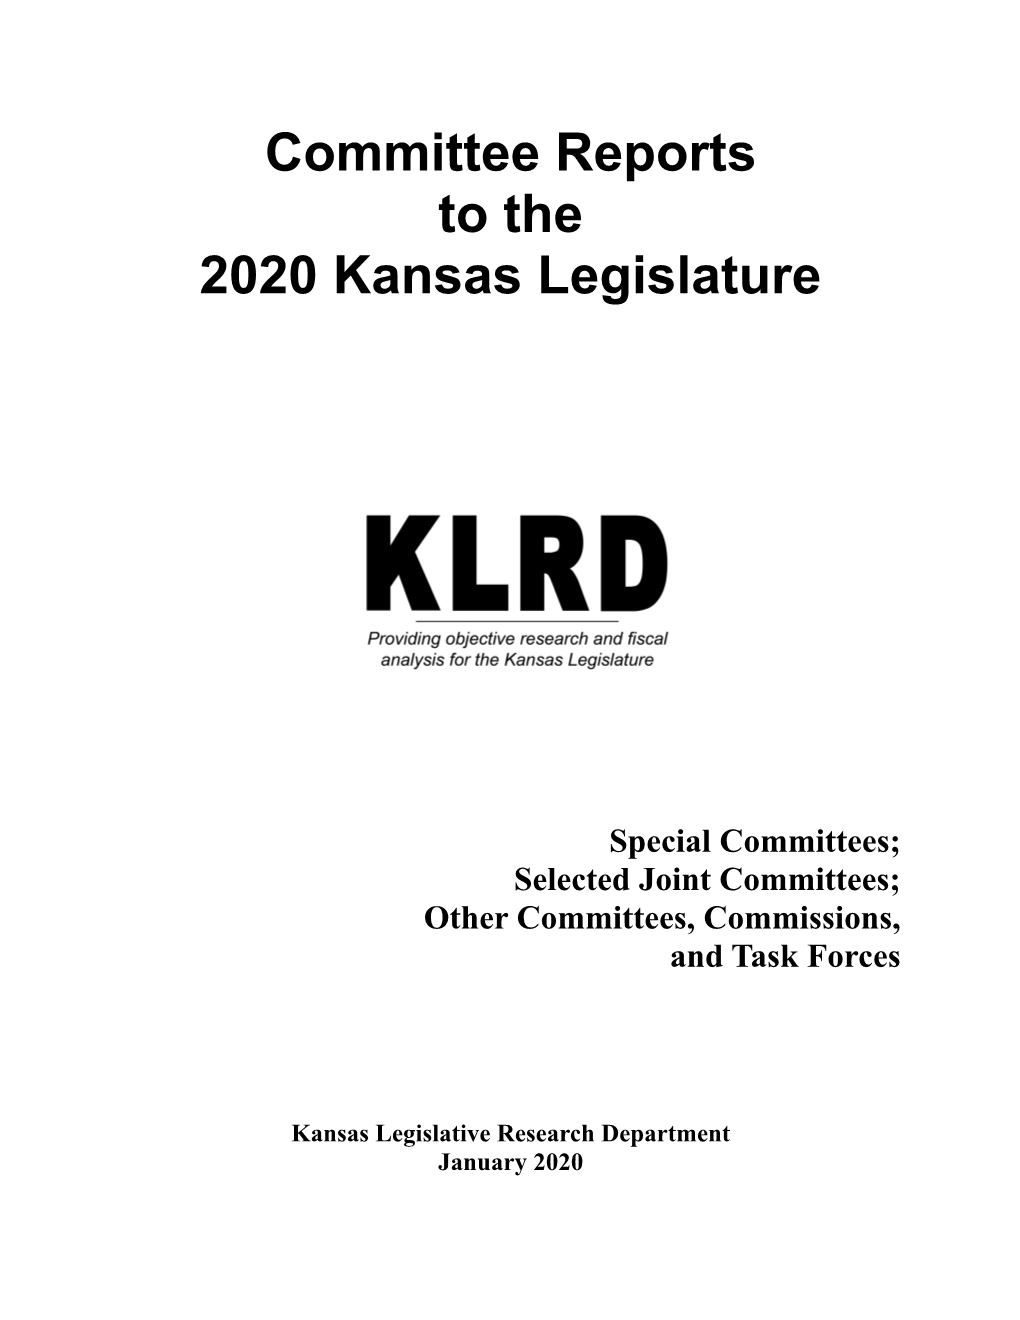 Committee Reports to the 2020 Legislature